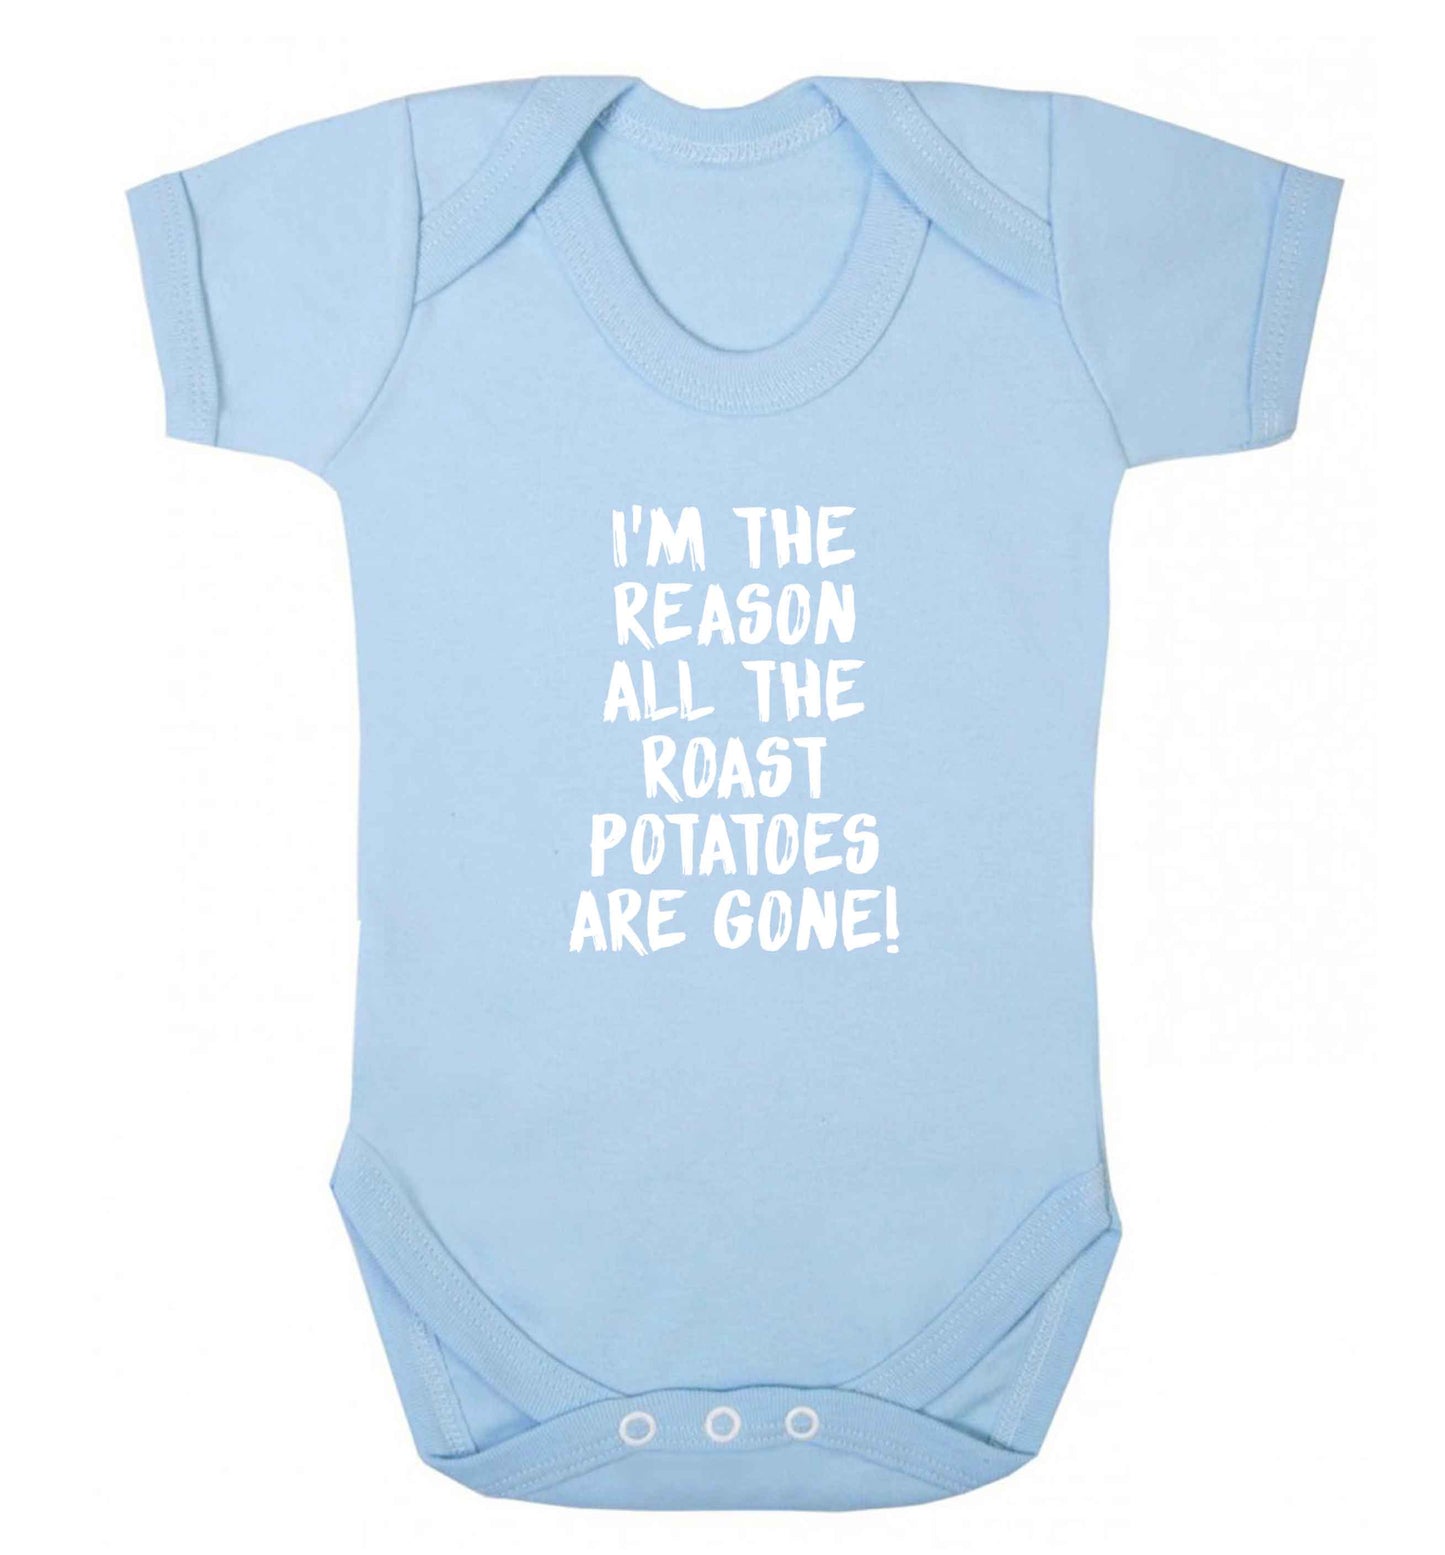 I'm the reason all the roast potatoes are gone baby vest pale blue 18-24 months